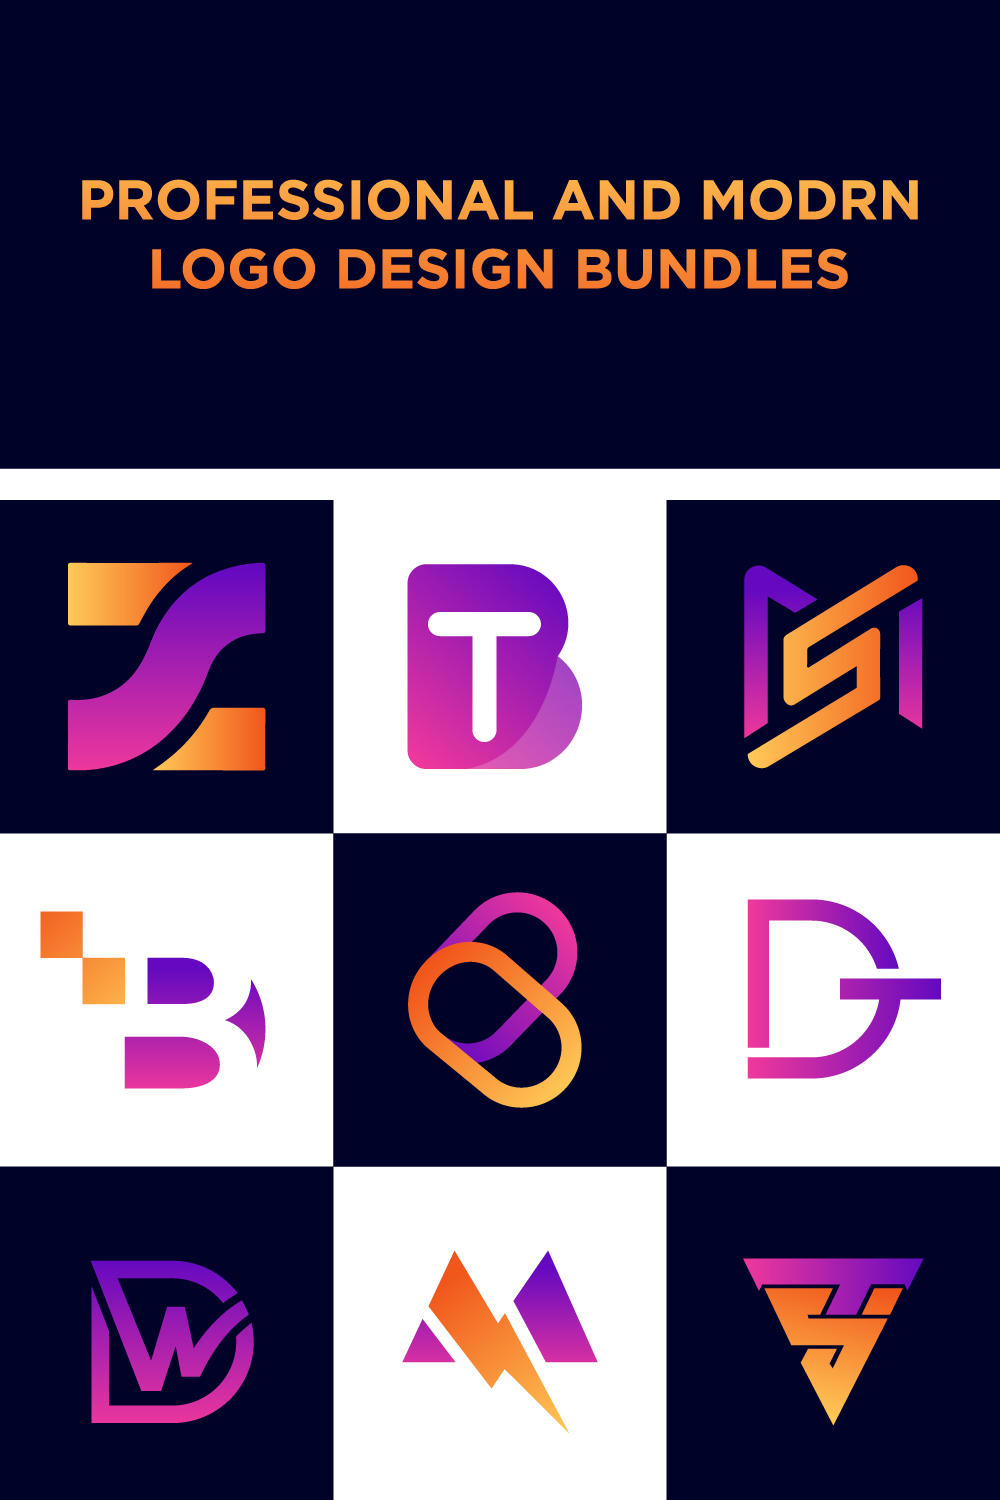 A set of images with amazing logos.